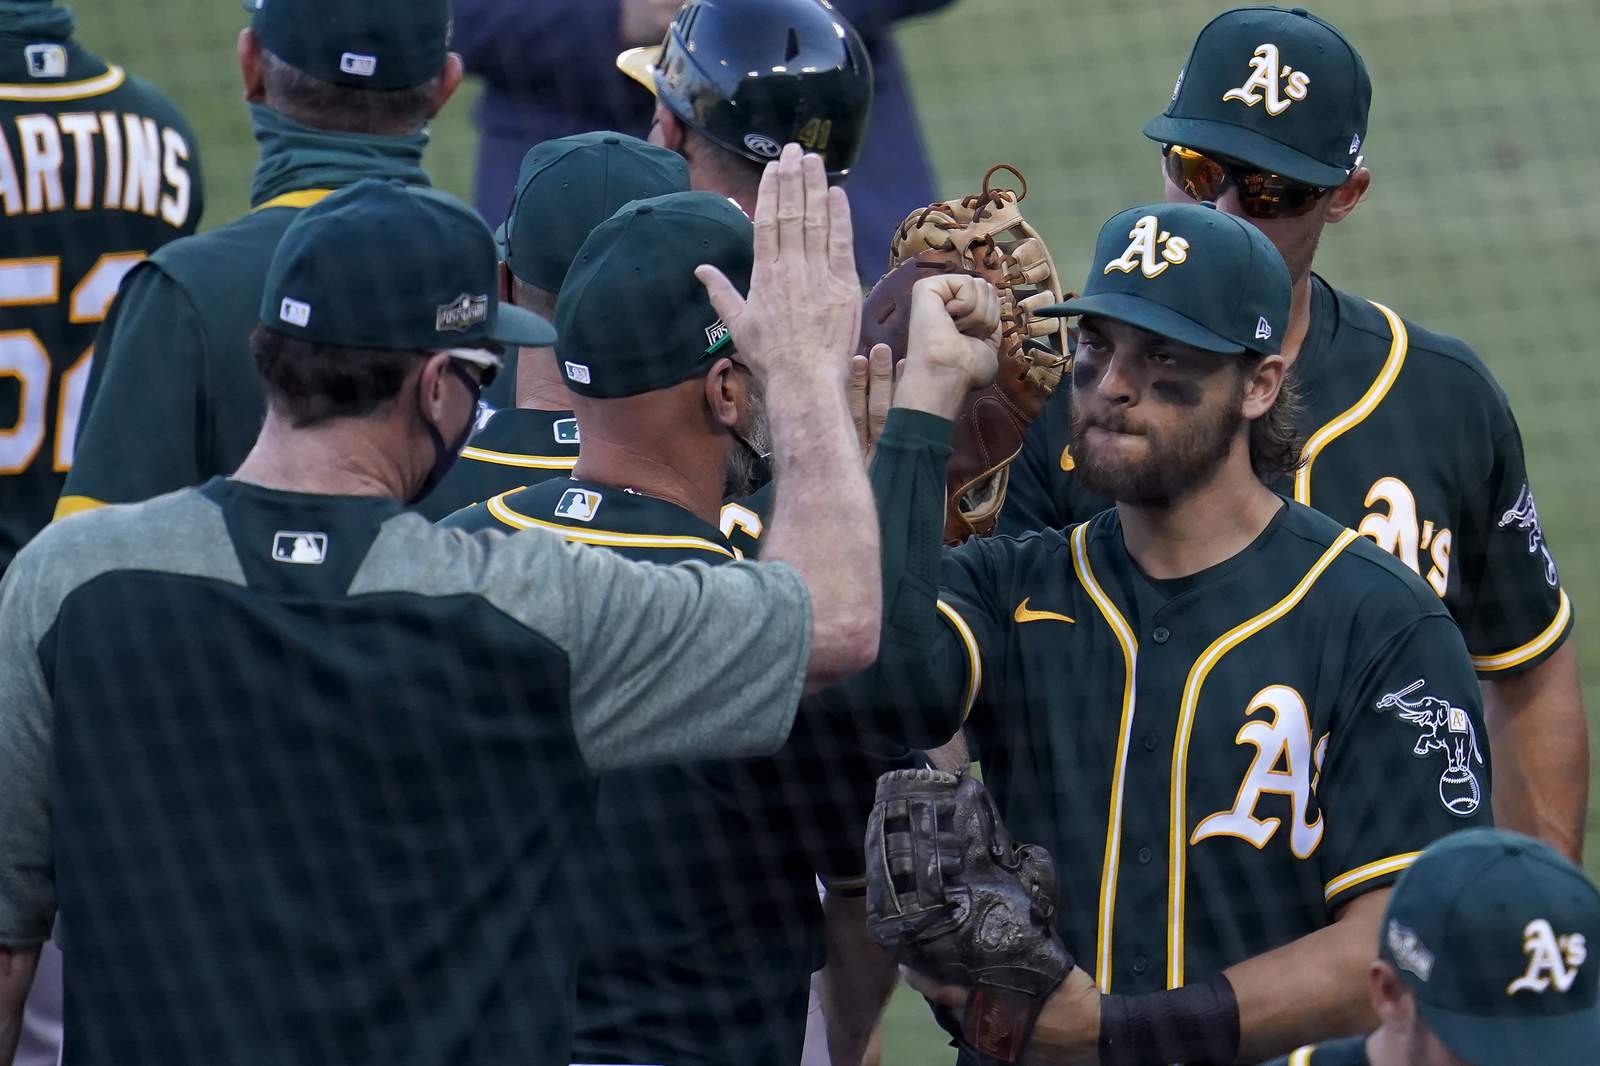 Pinder's HR helps rally A's past Astros 9-7, trail ALDS 2-1